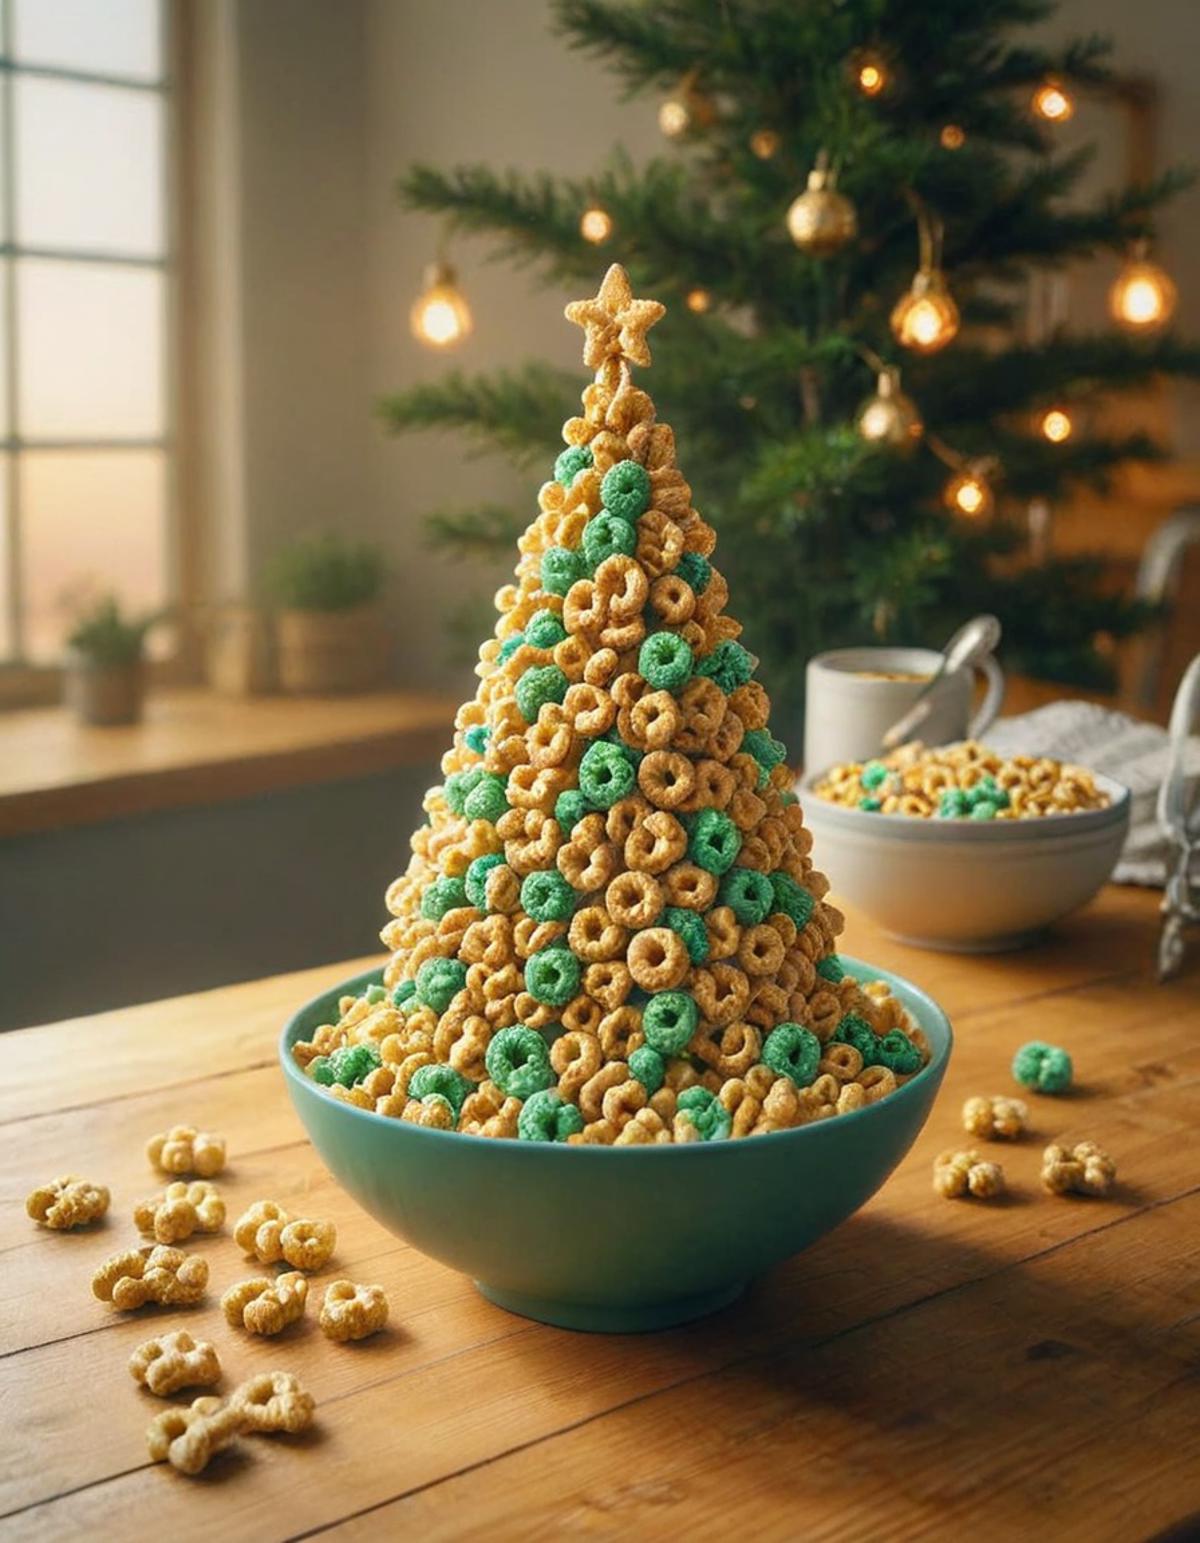 A Christmas tree made of cereal and a bowl of cereal on a table.